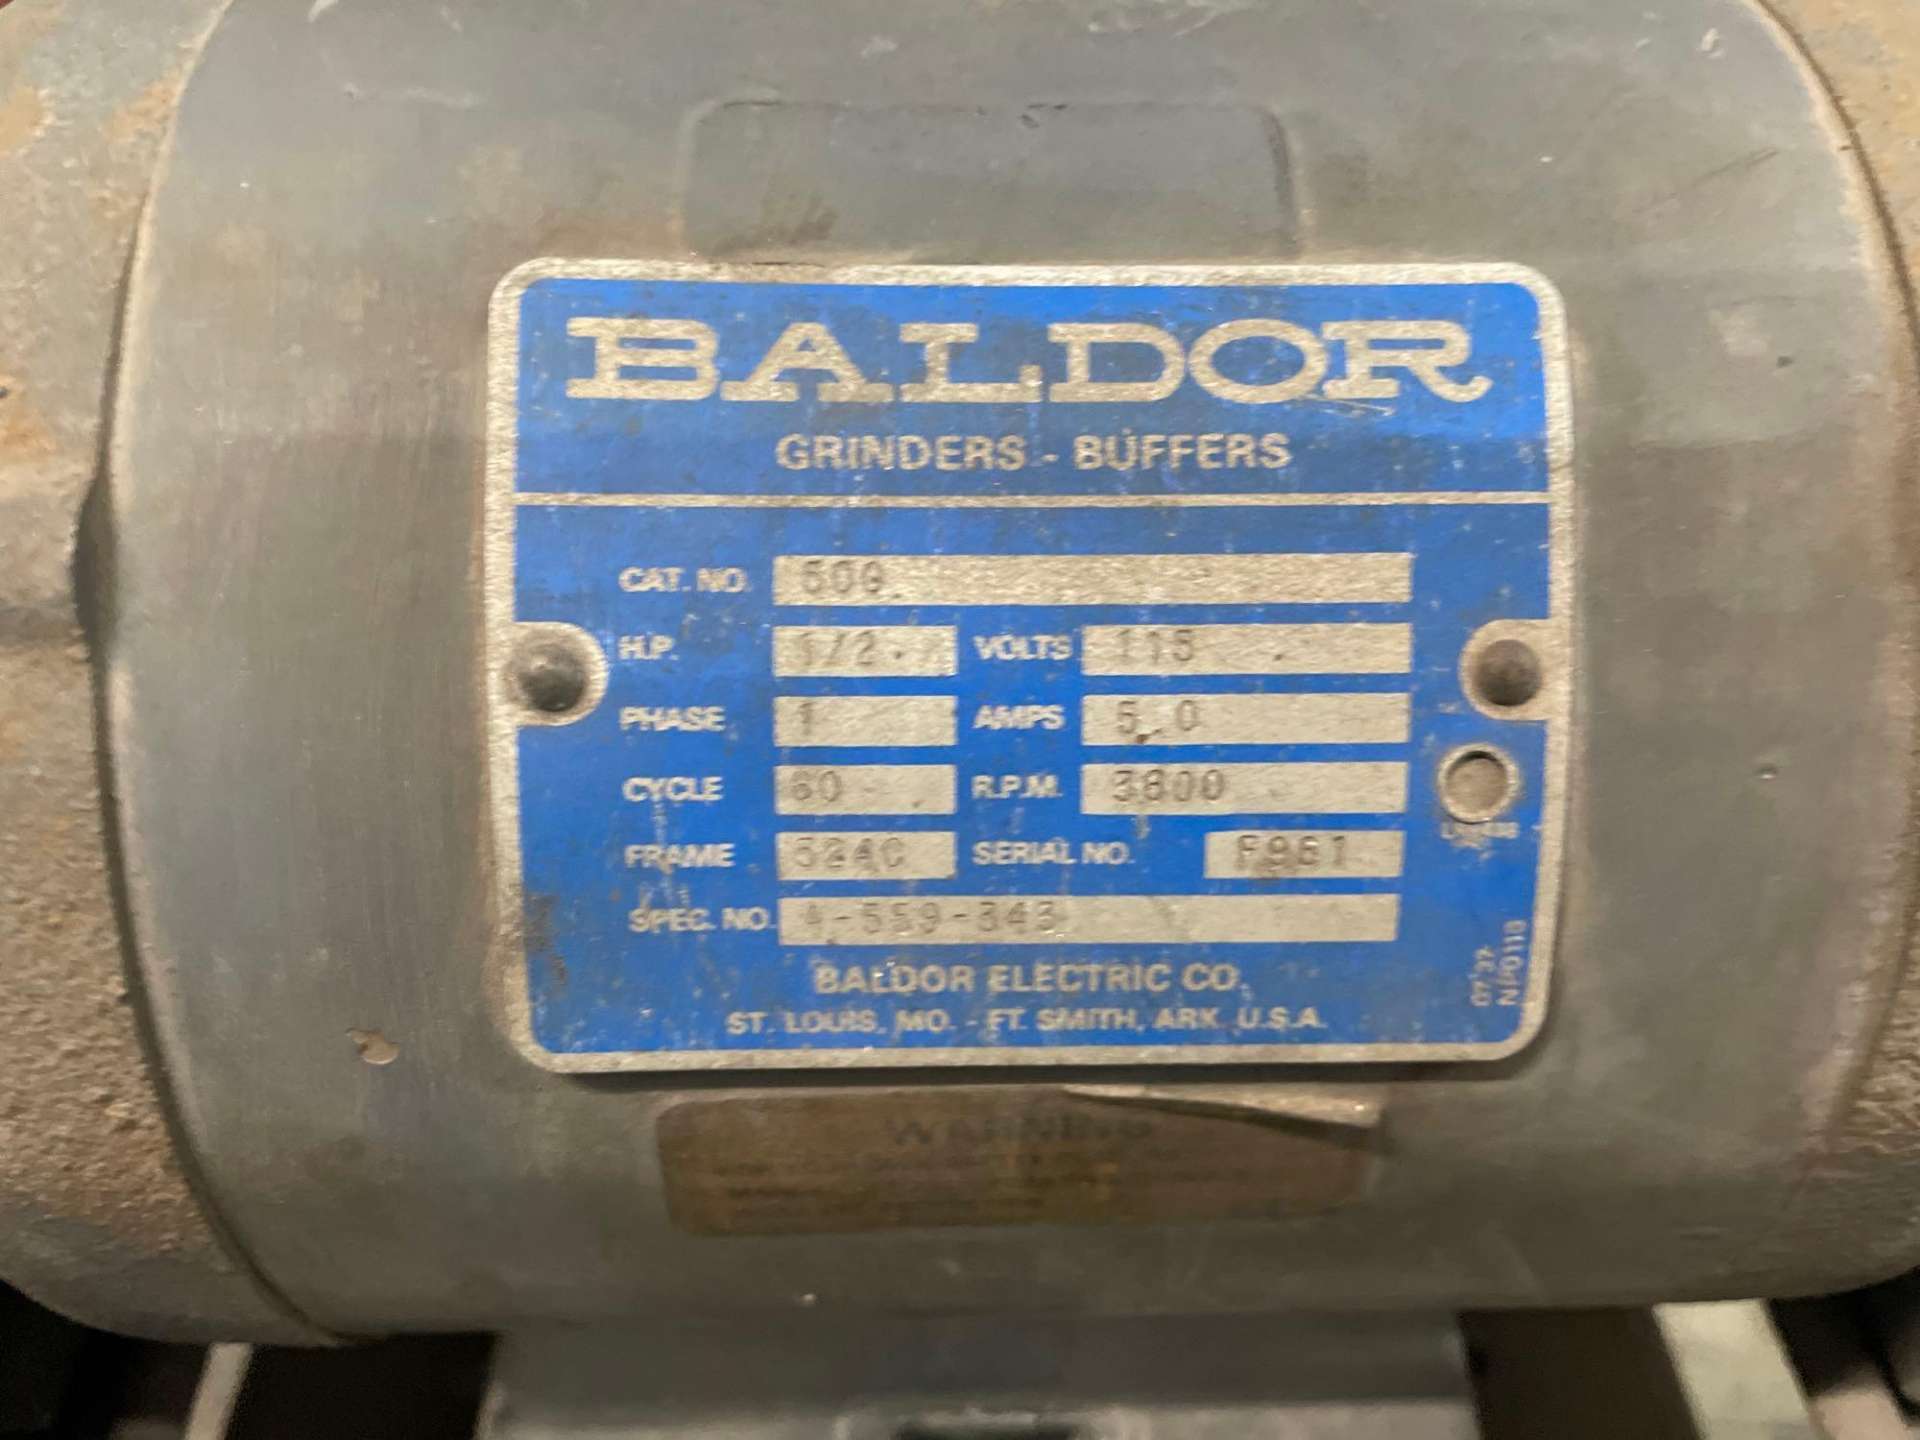 Lot of 2 Baldor Double End Grinders - Image 4 of 7